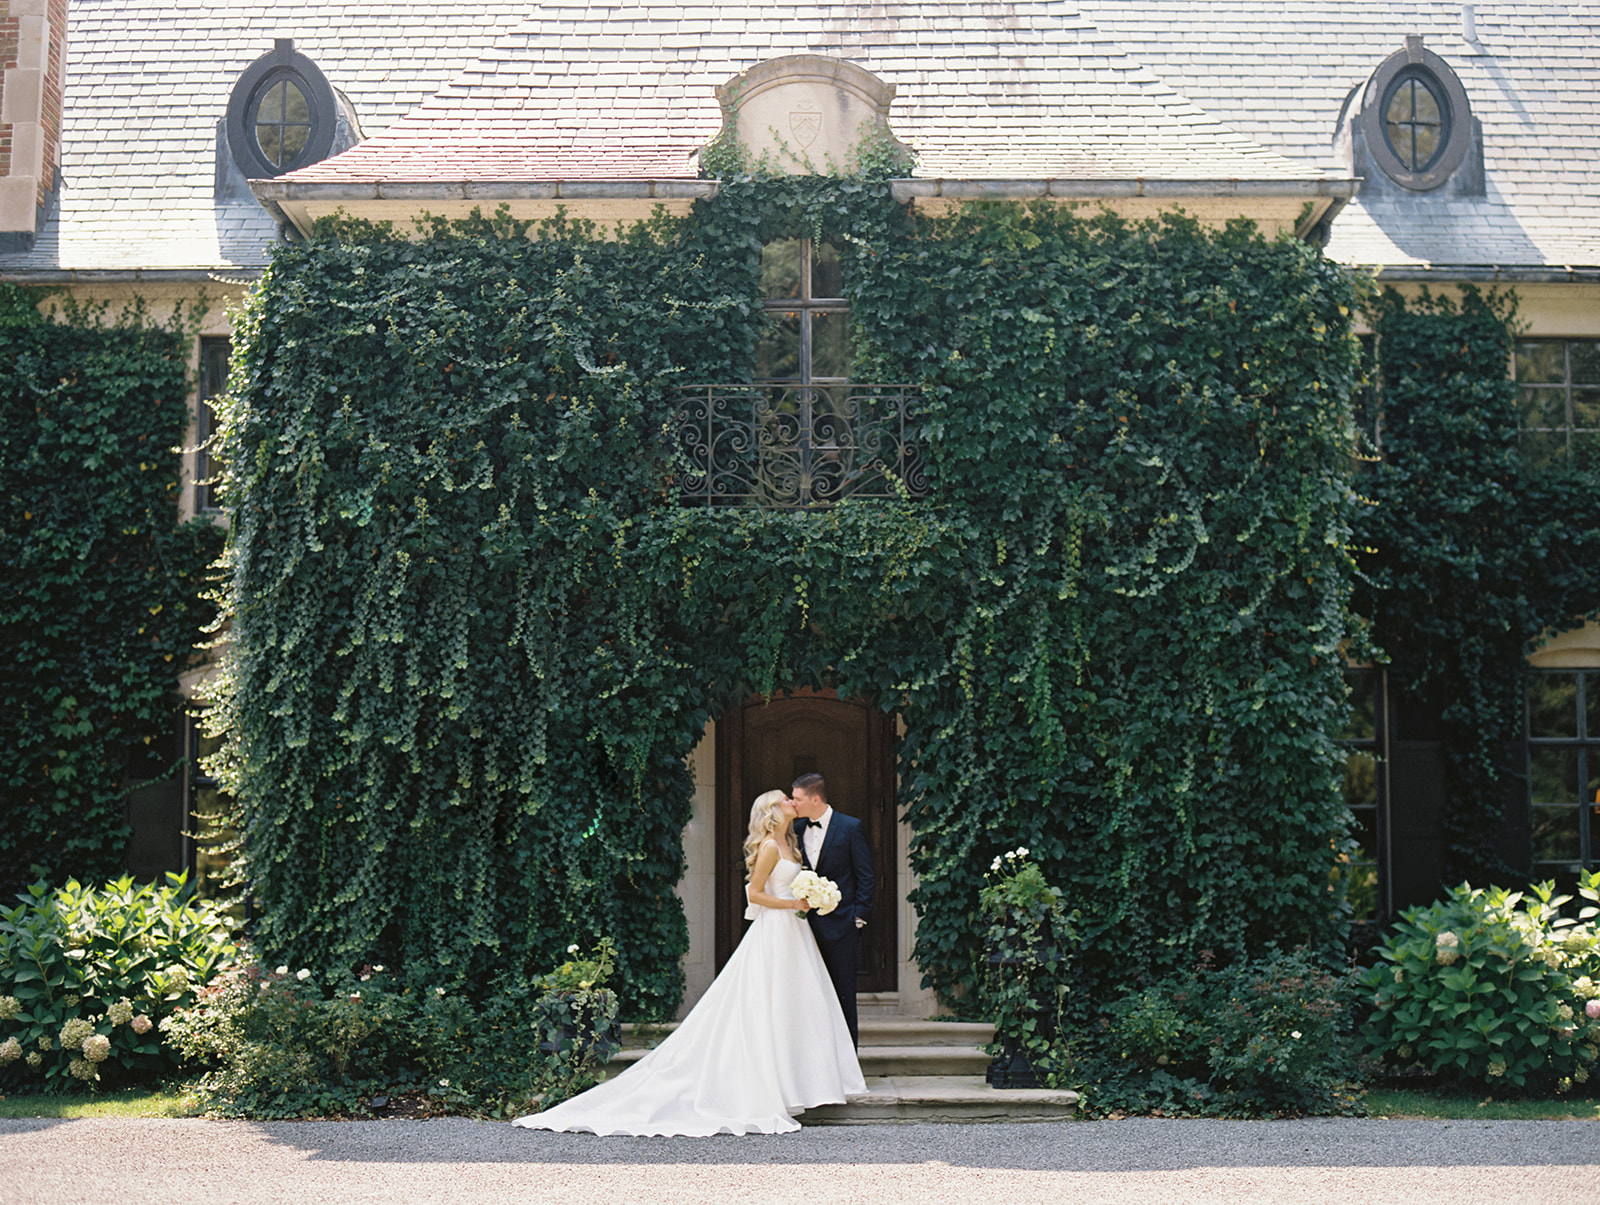 Bride and groom kissing in front of Greencrest Manor wedding venue in Battle Creek, Michigan